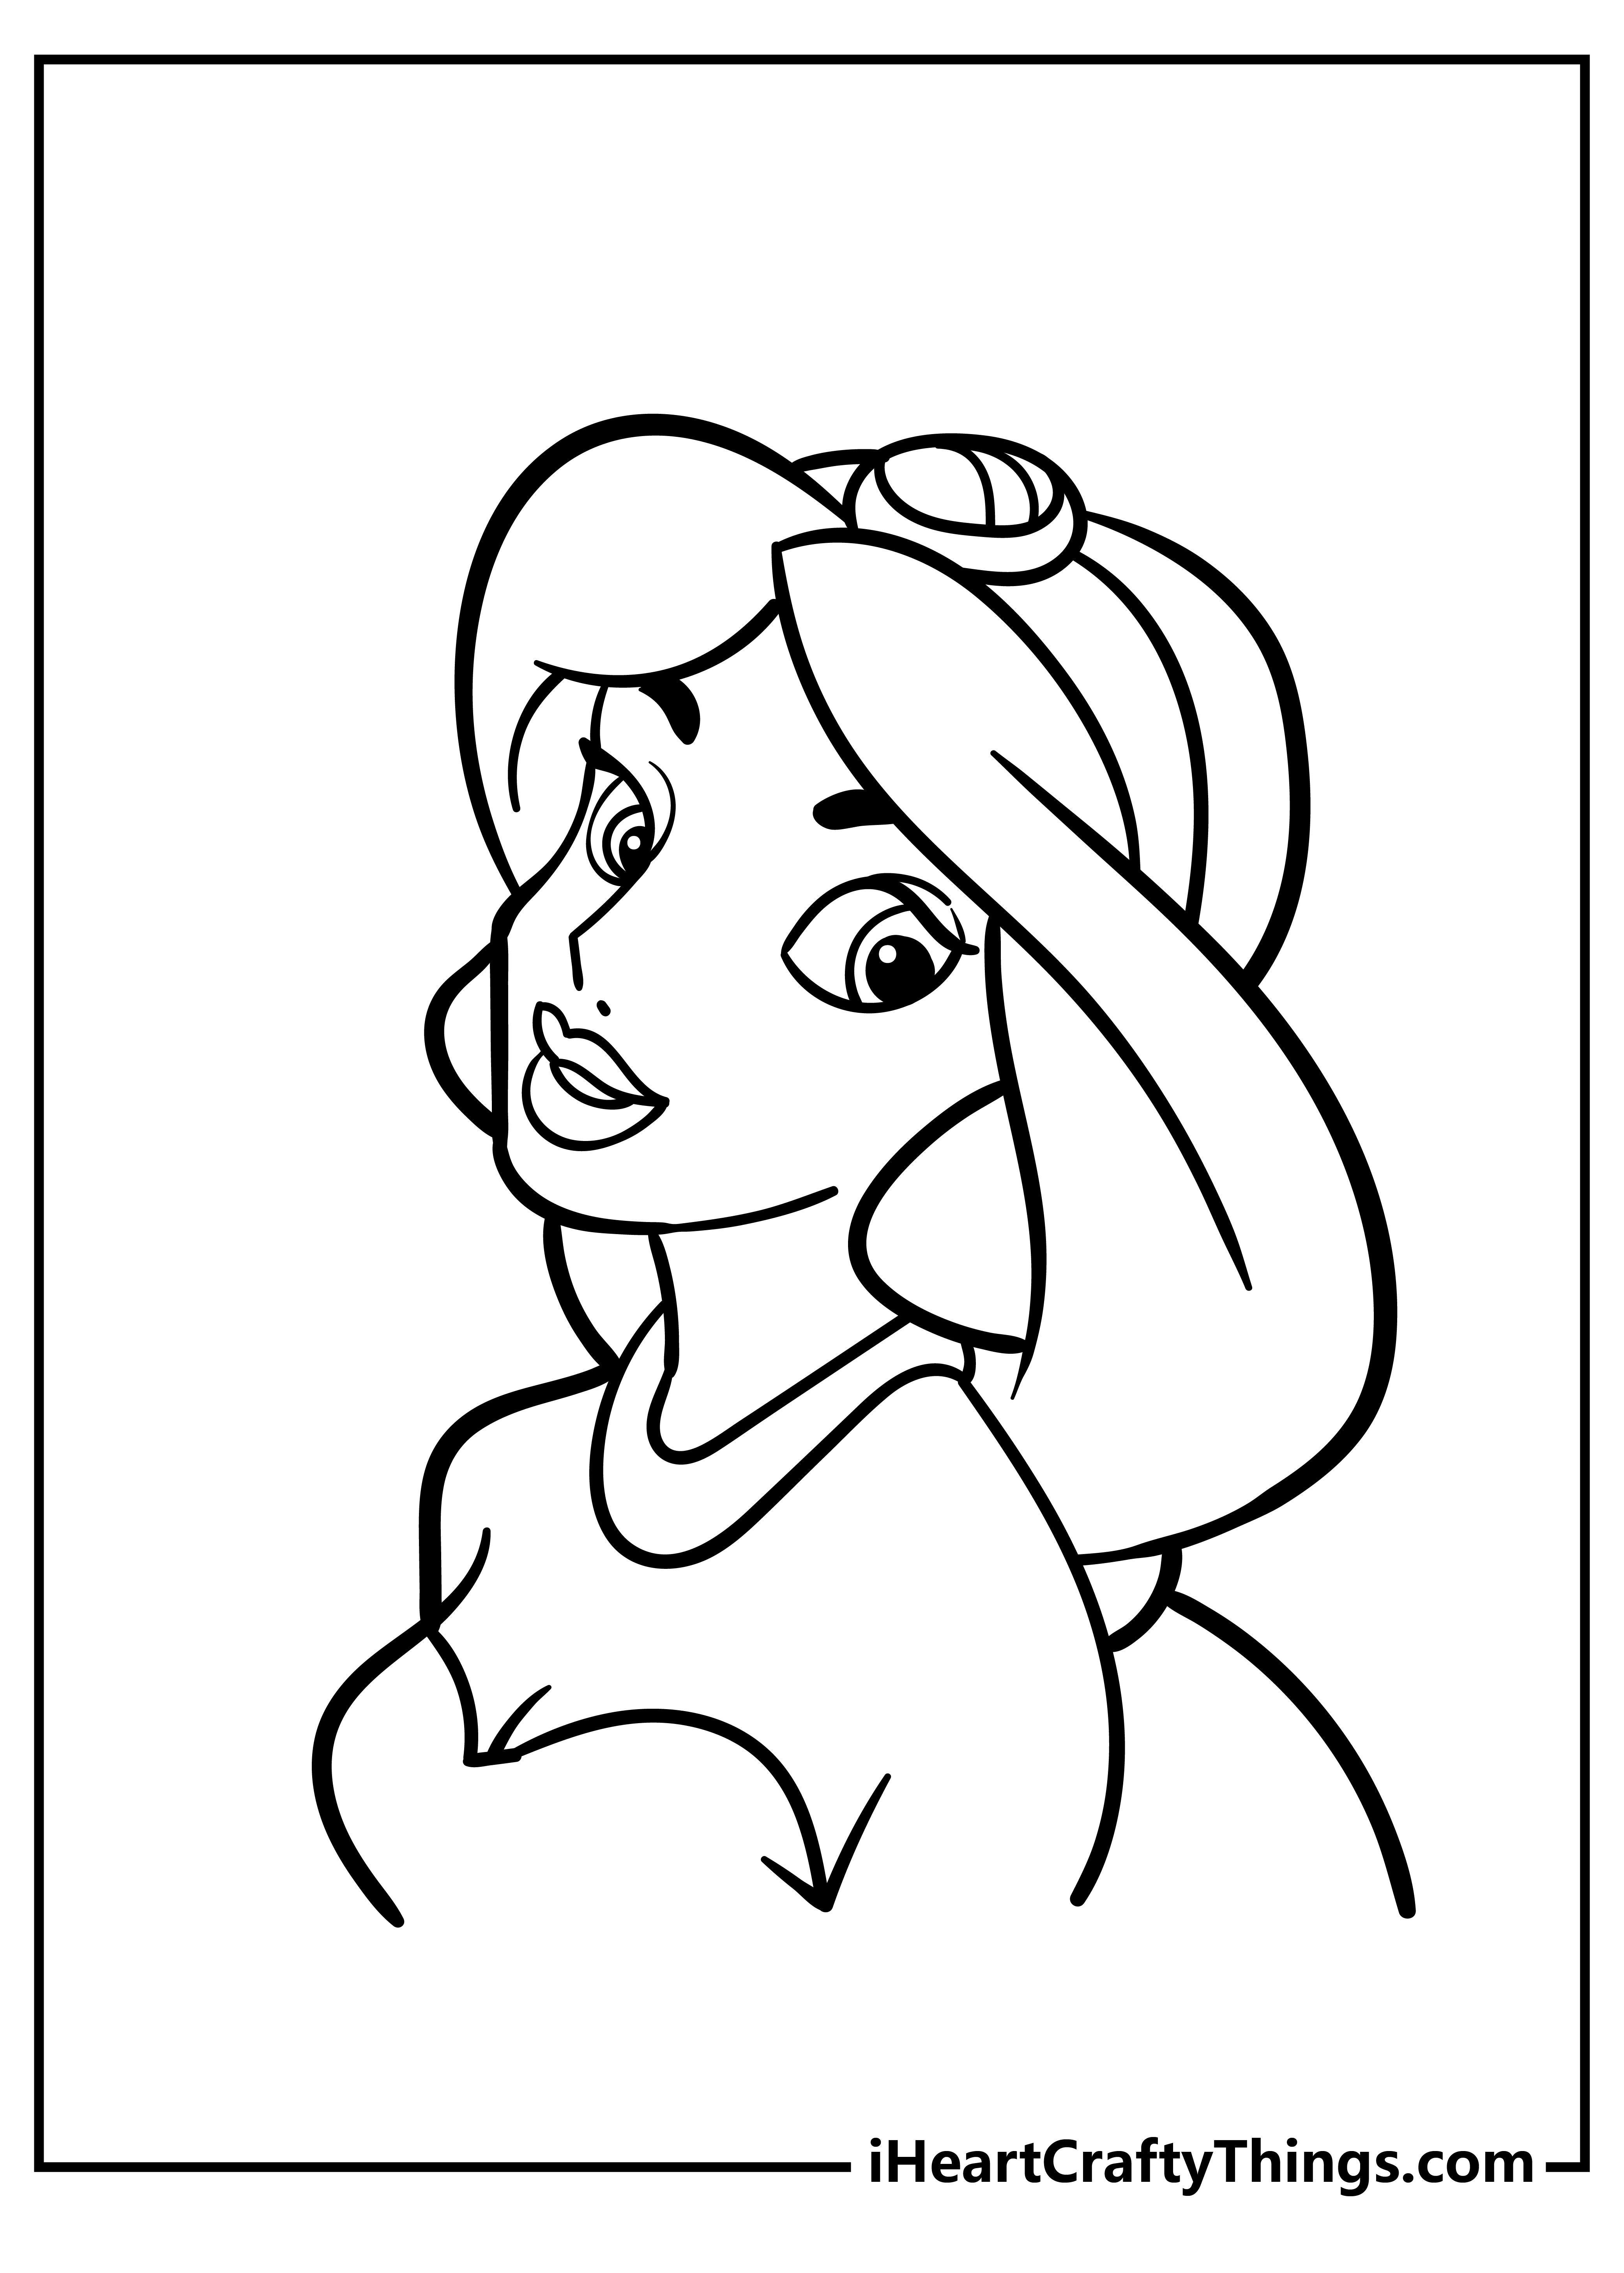 Jasmine coloring pages free printables